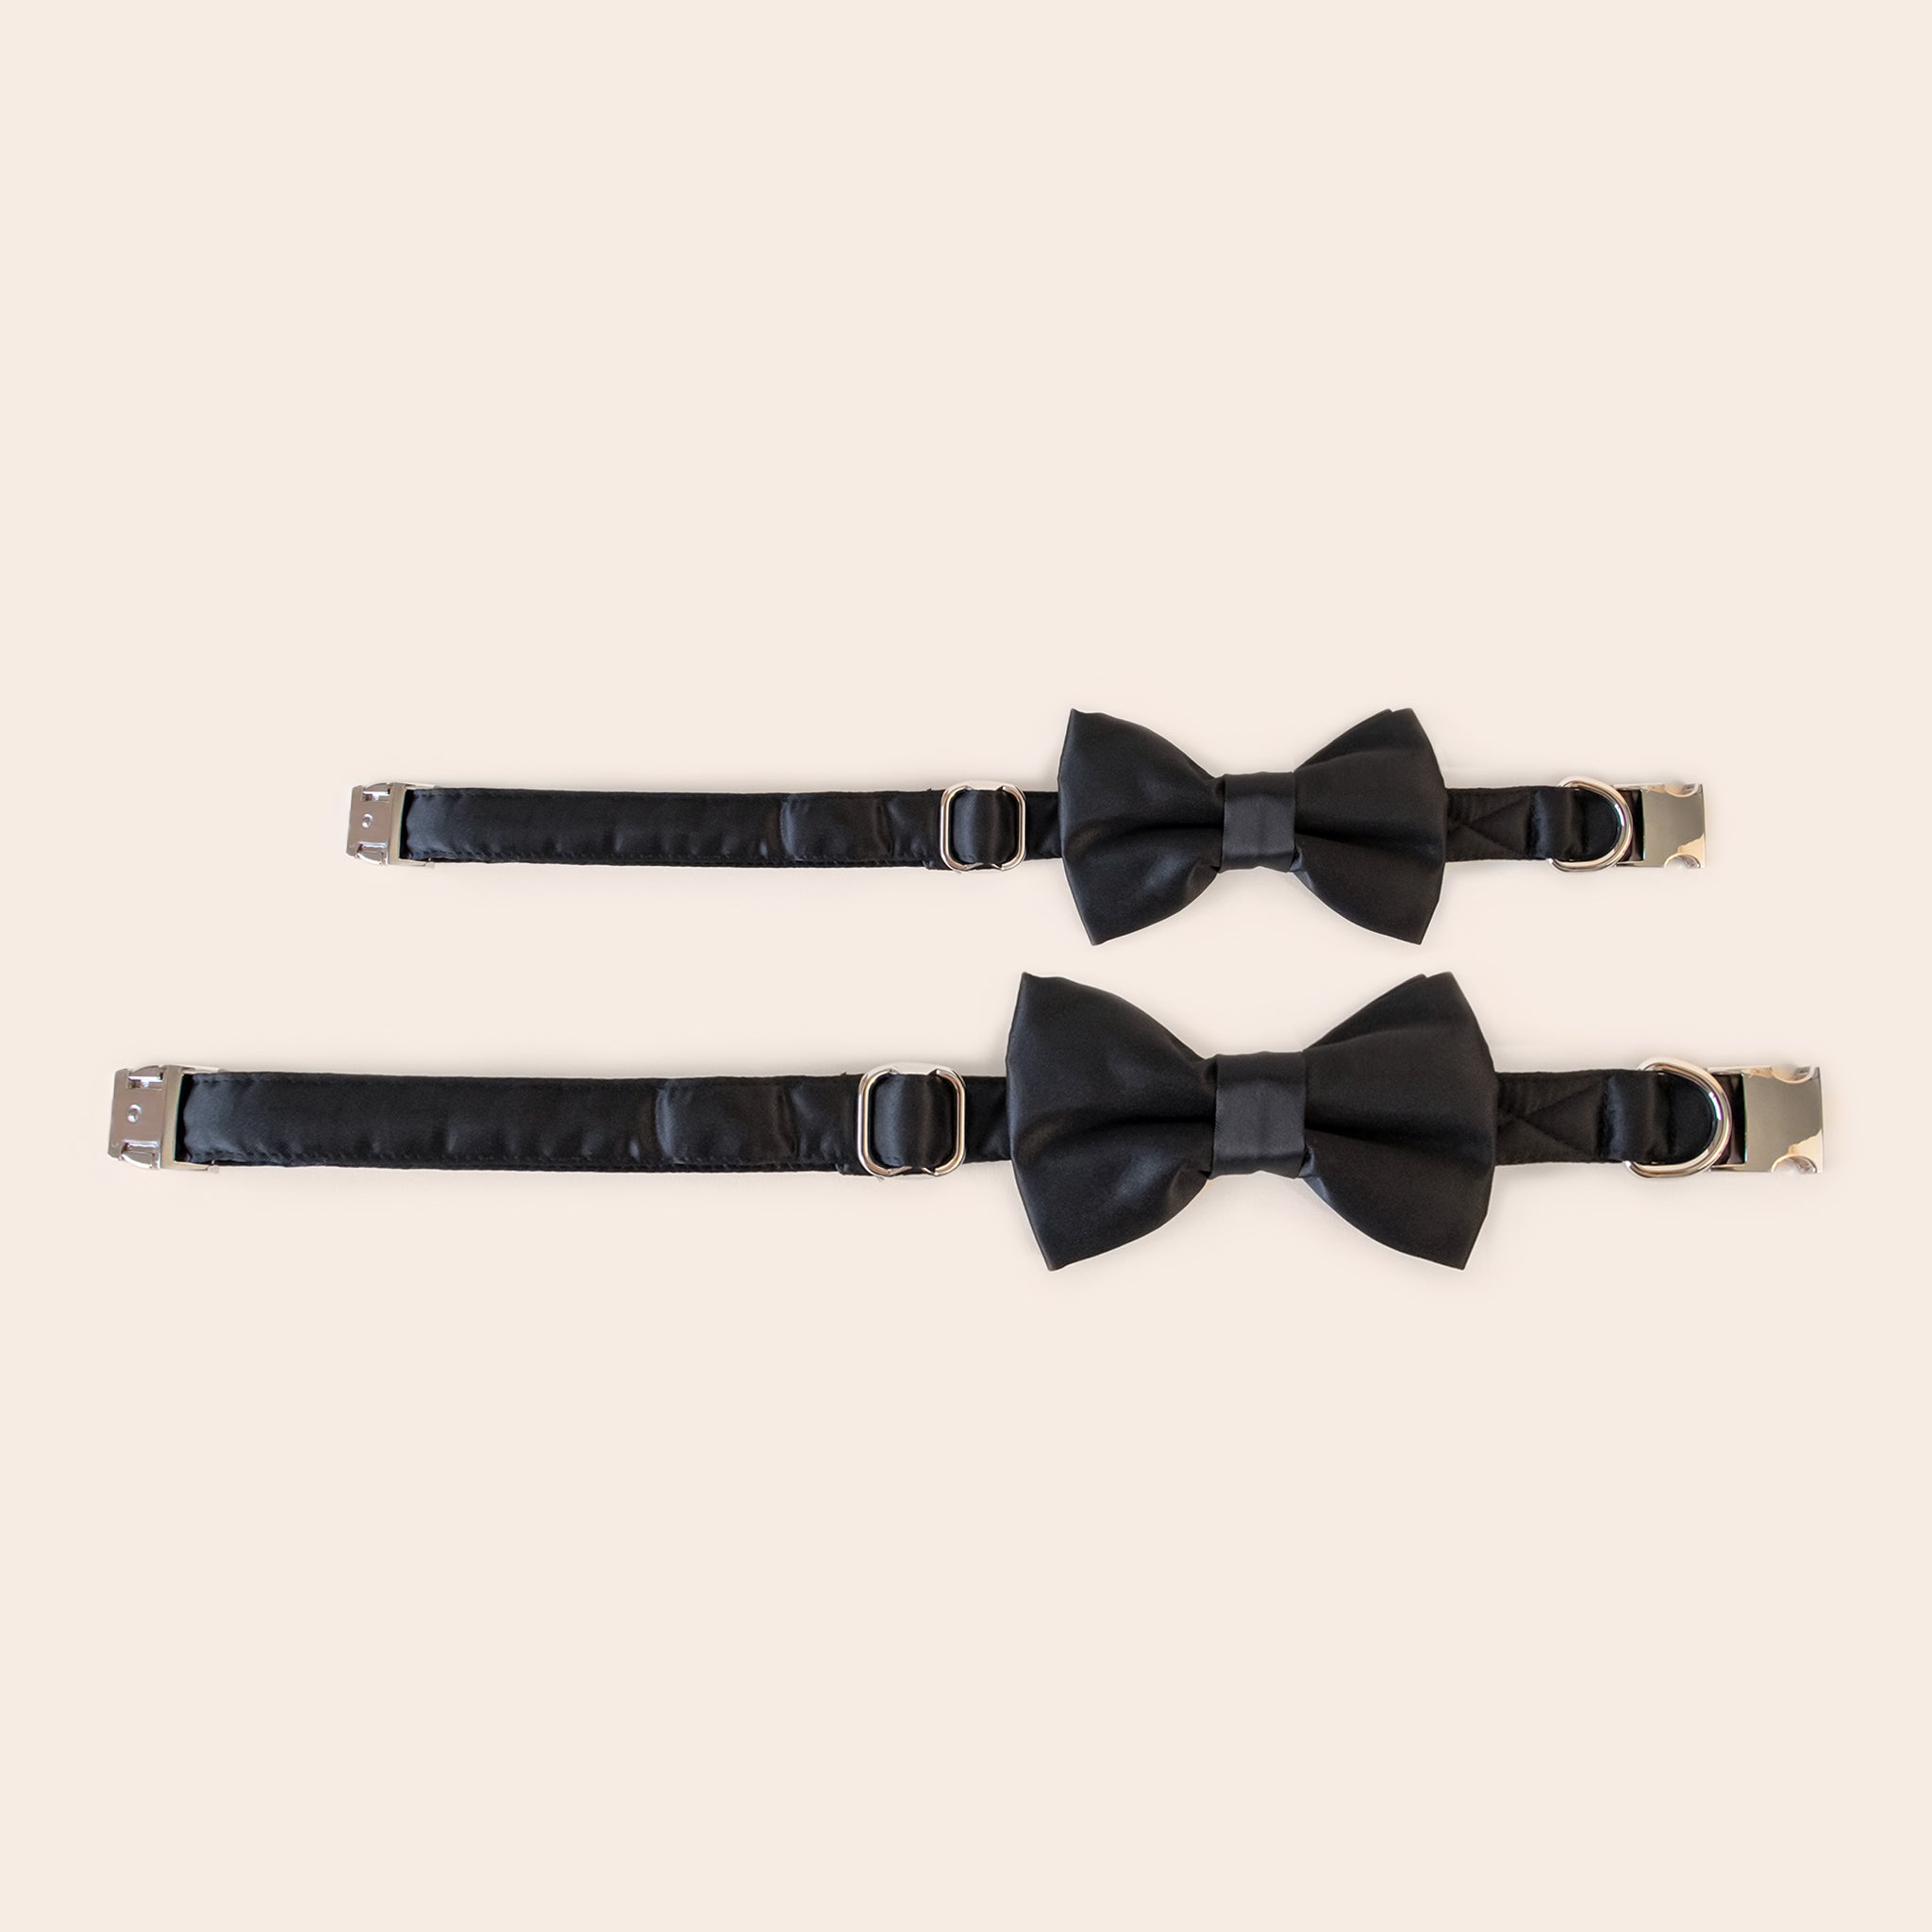 Muggsy Dog Bow Tie Collar in Black by Birdy Grey, front view